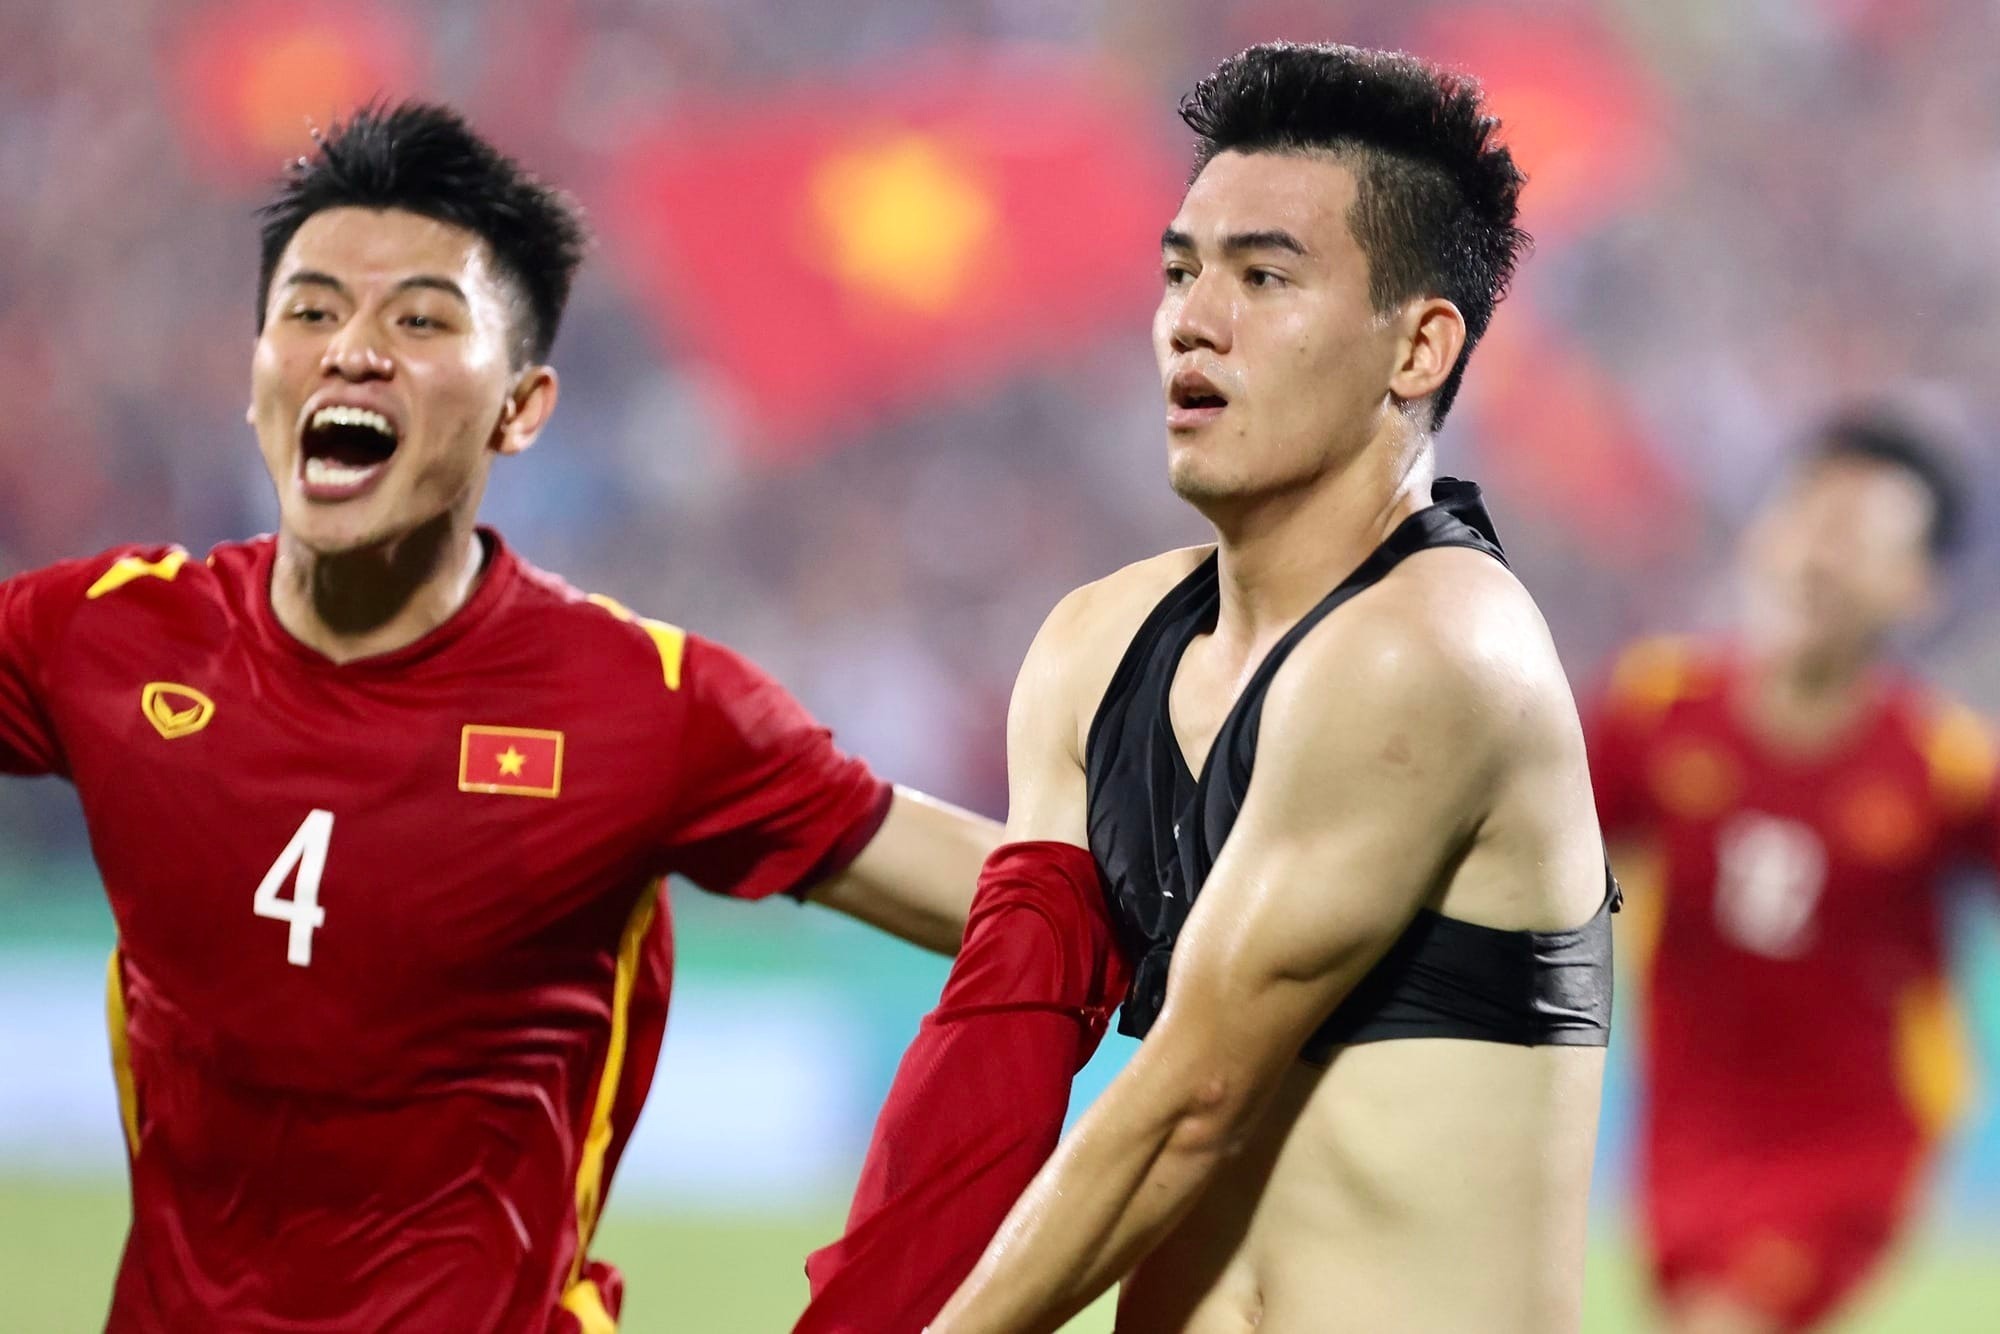 What is the use of Tien Linh’s black “bra” revealed after taking off his shirt to celebrate?